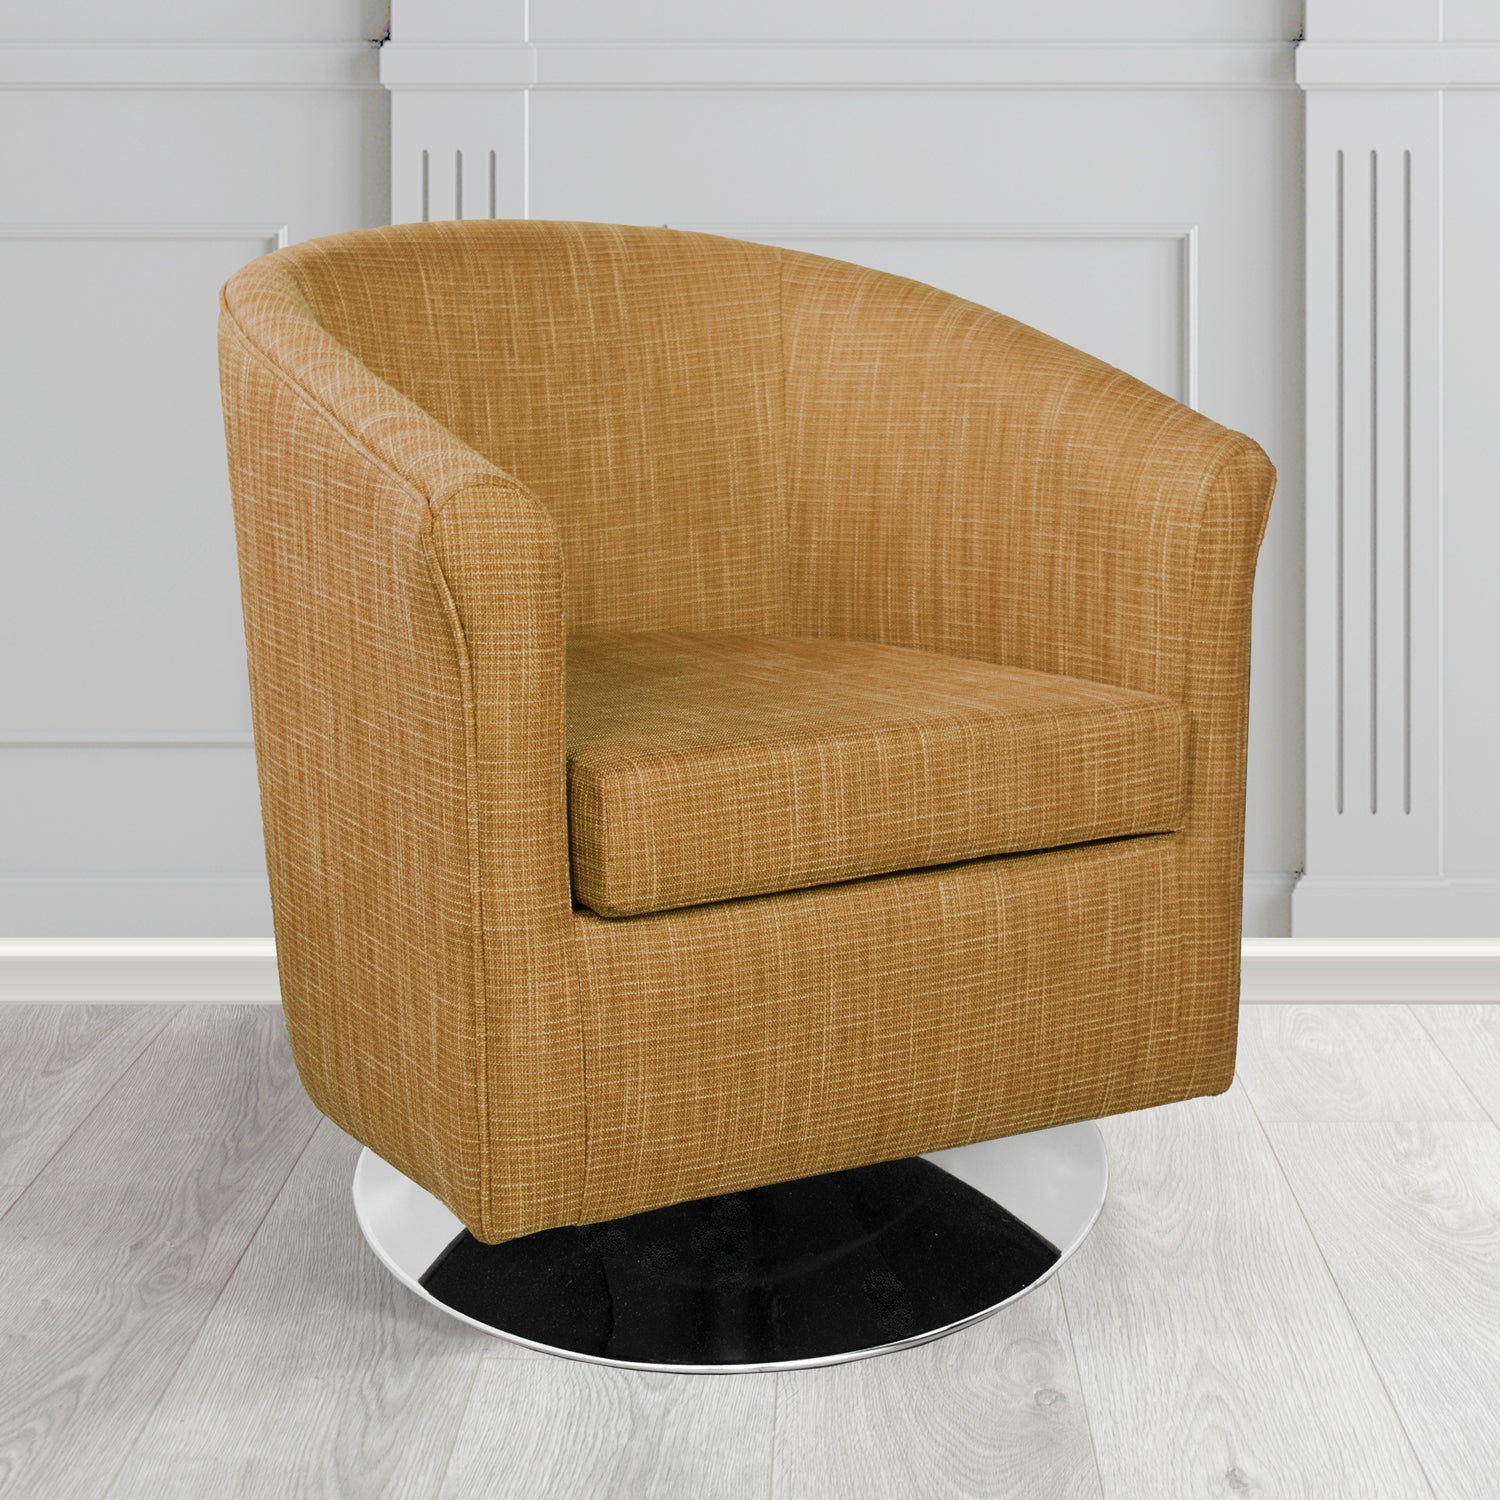 Tuscany Ravel Cumin Contract Crib 5 Fabric Swivel Tub Chair - Antimicrobial & Water-Resistant - The Tub Chair Shop